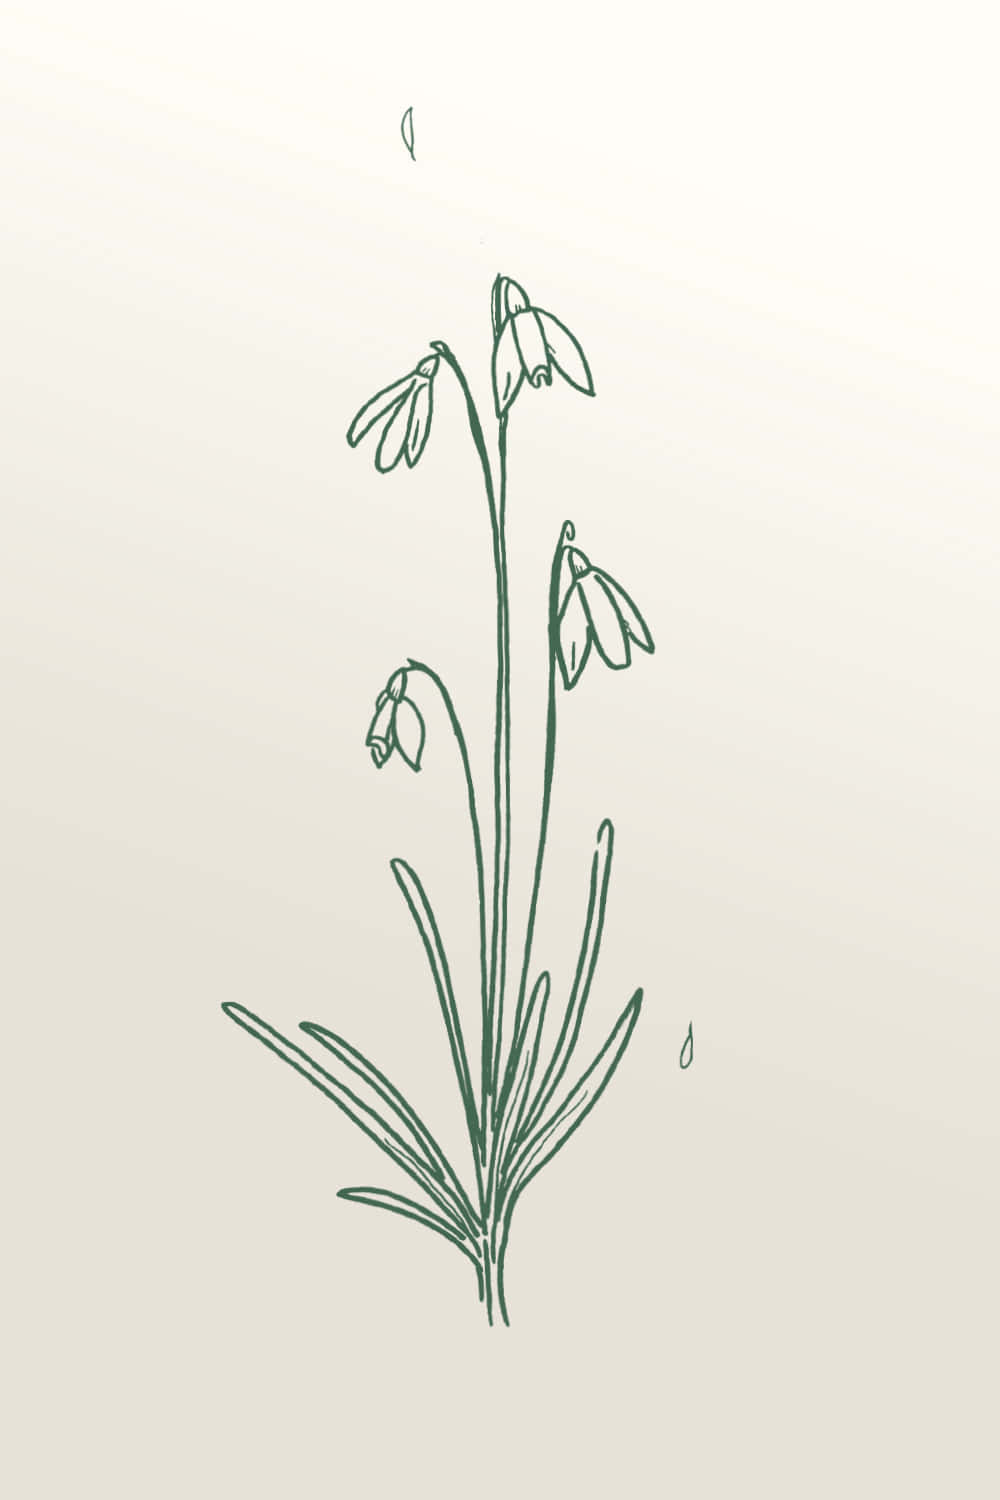 Snowdrops Illustration In A Sketch Style Wallpaper